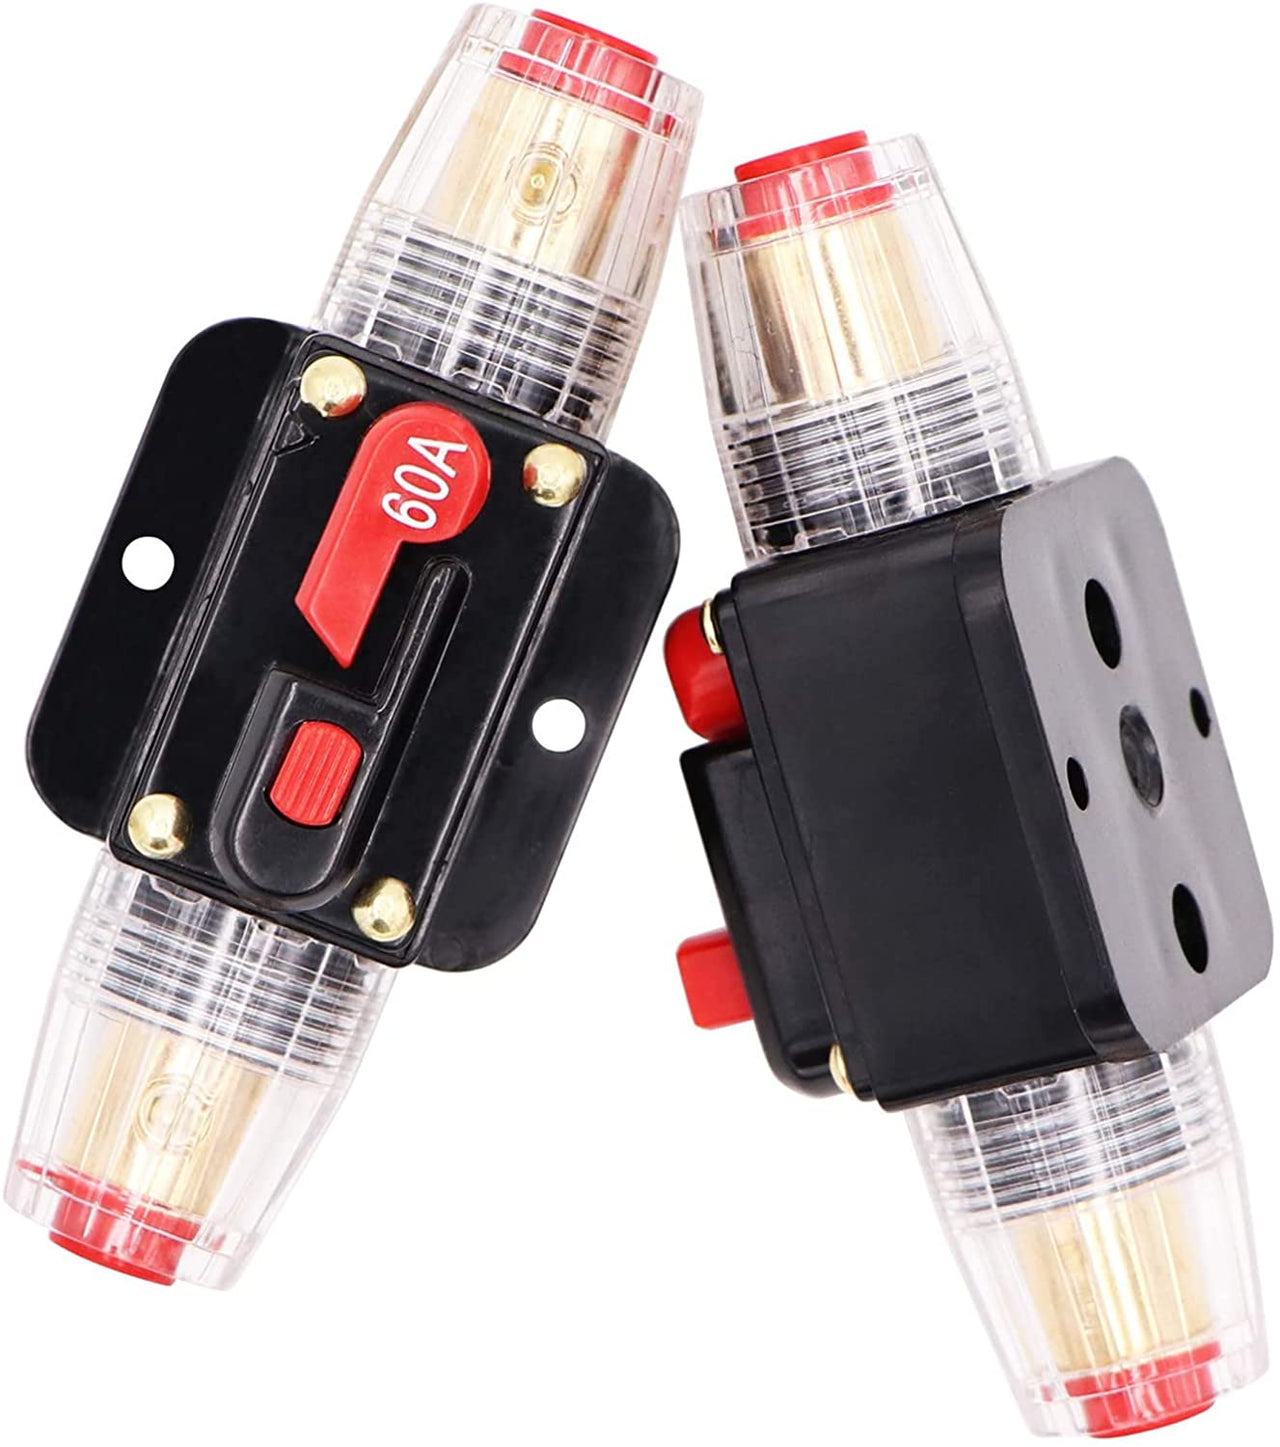 2 Absolute ICB60 4/8 AWG 60 Amp in-line Circuit Breaker with Manual Reset with Manual Reset Car Auto Marine Boat Stereo